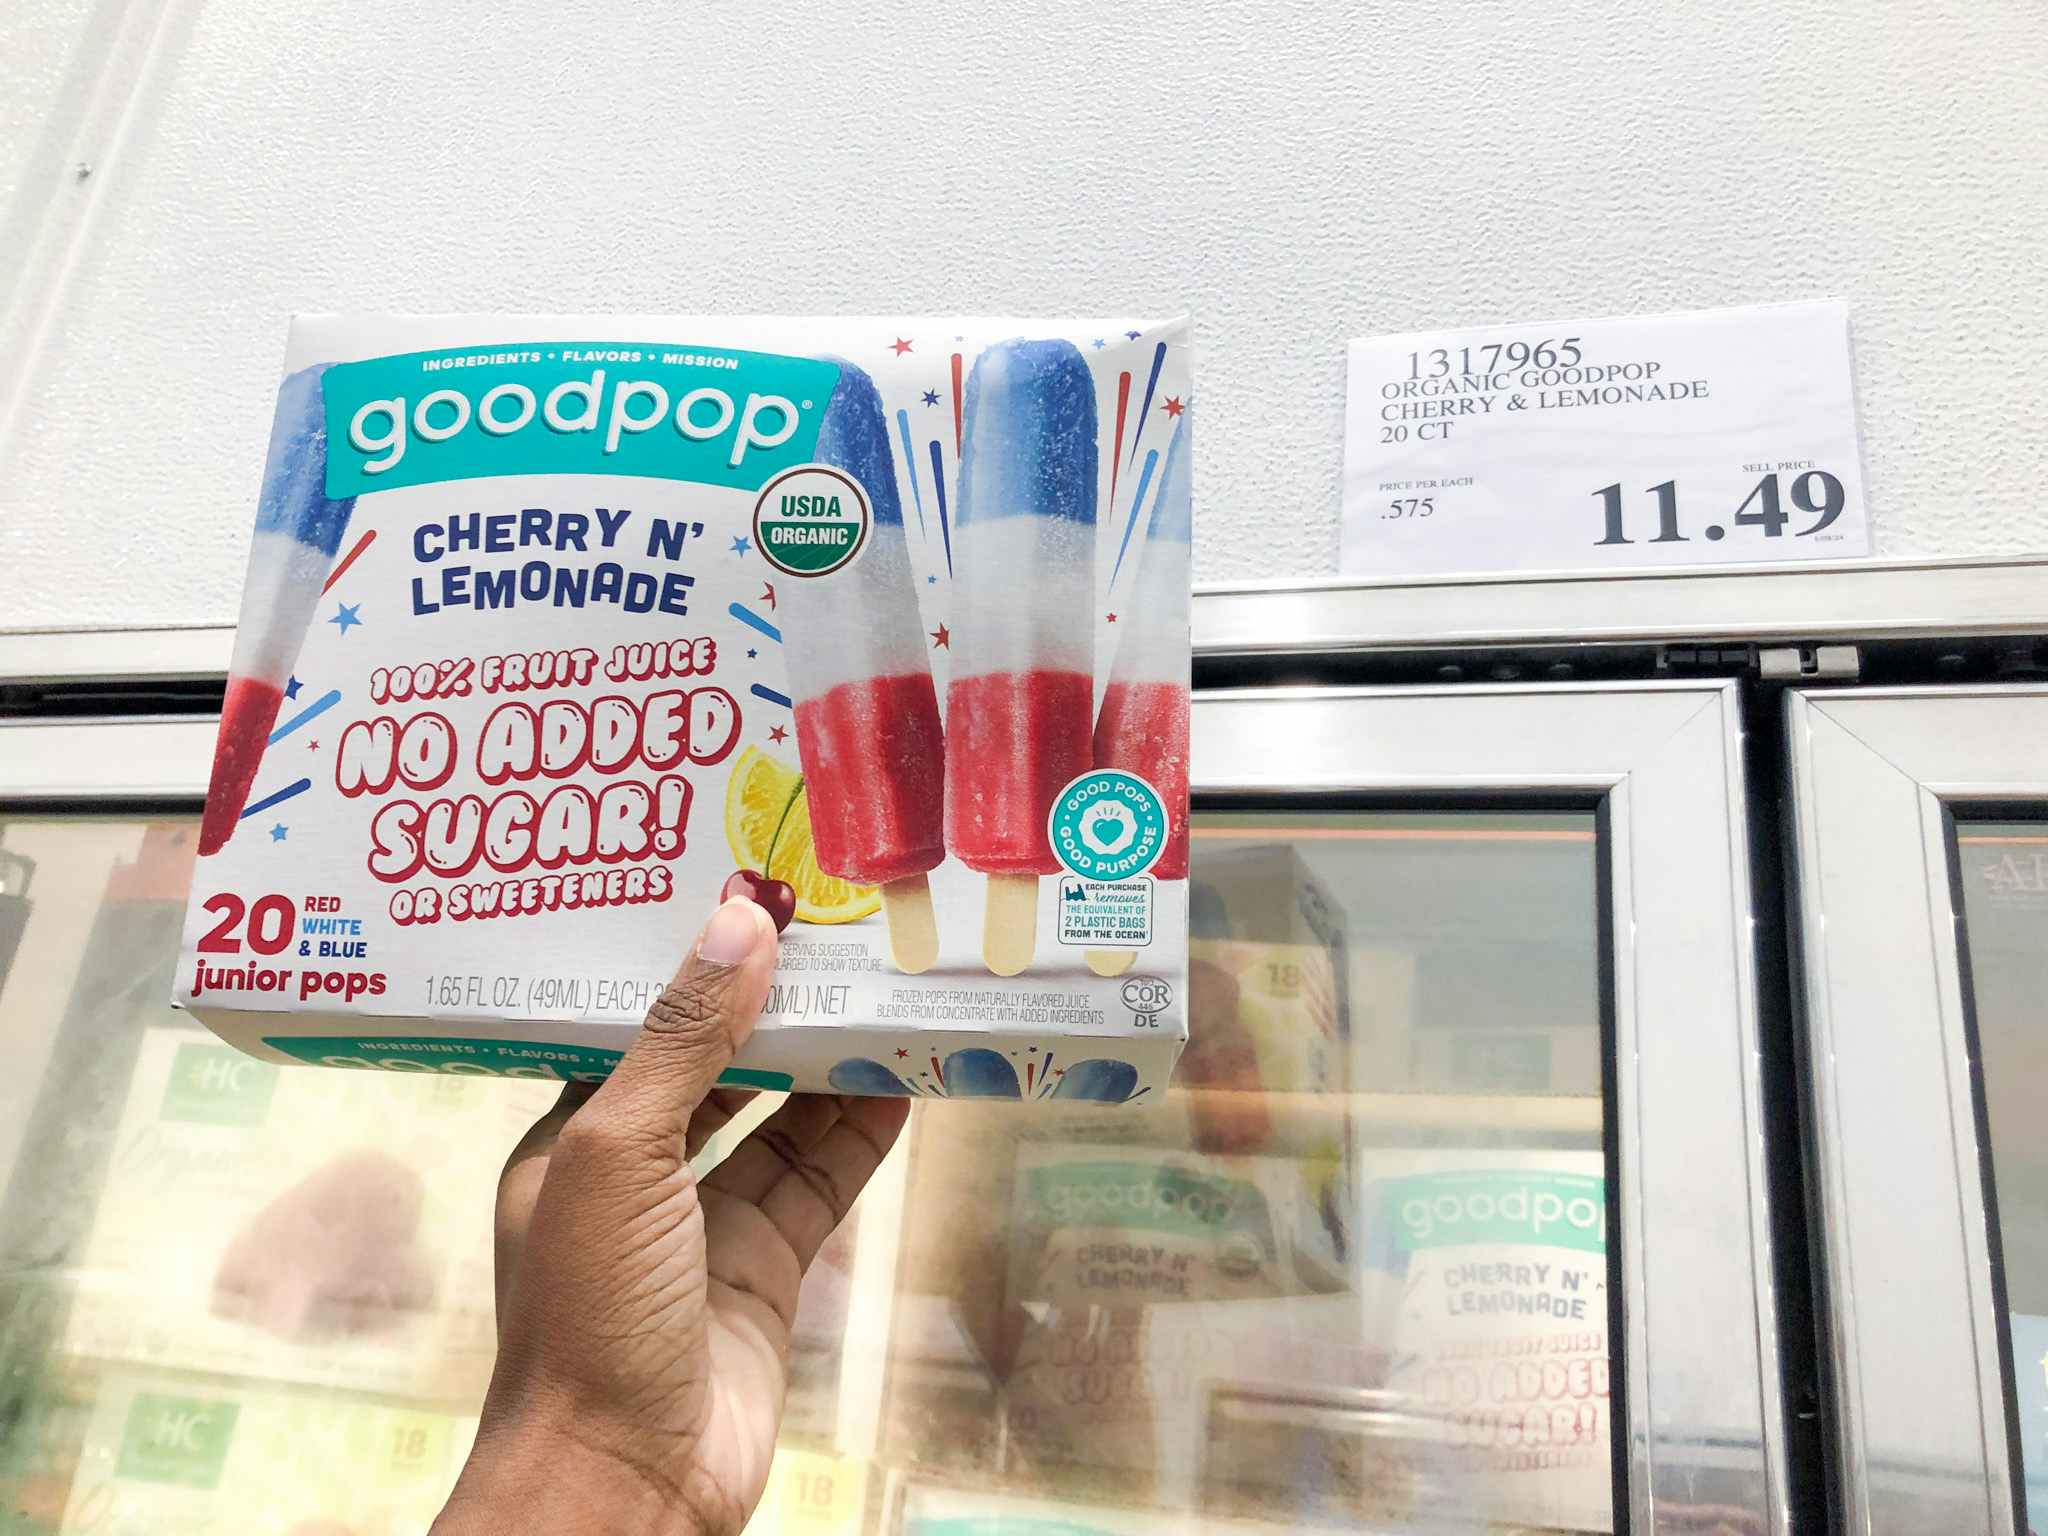 costco goodpop red white and blue ice pops 20 count signage